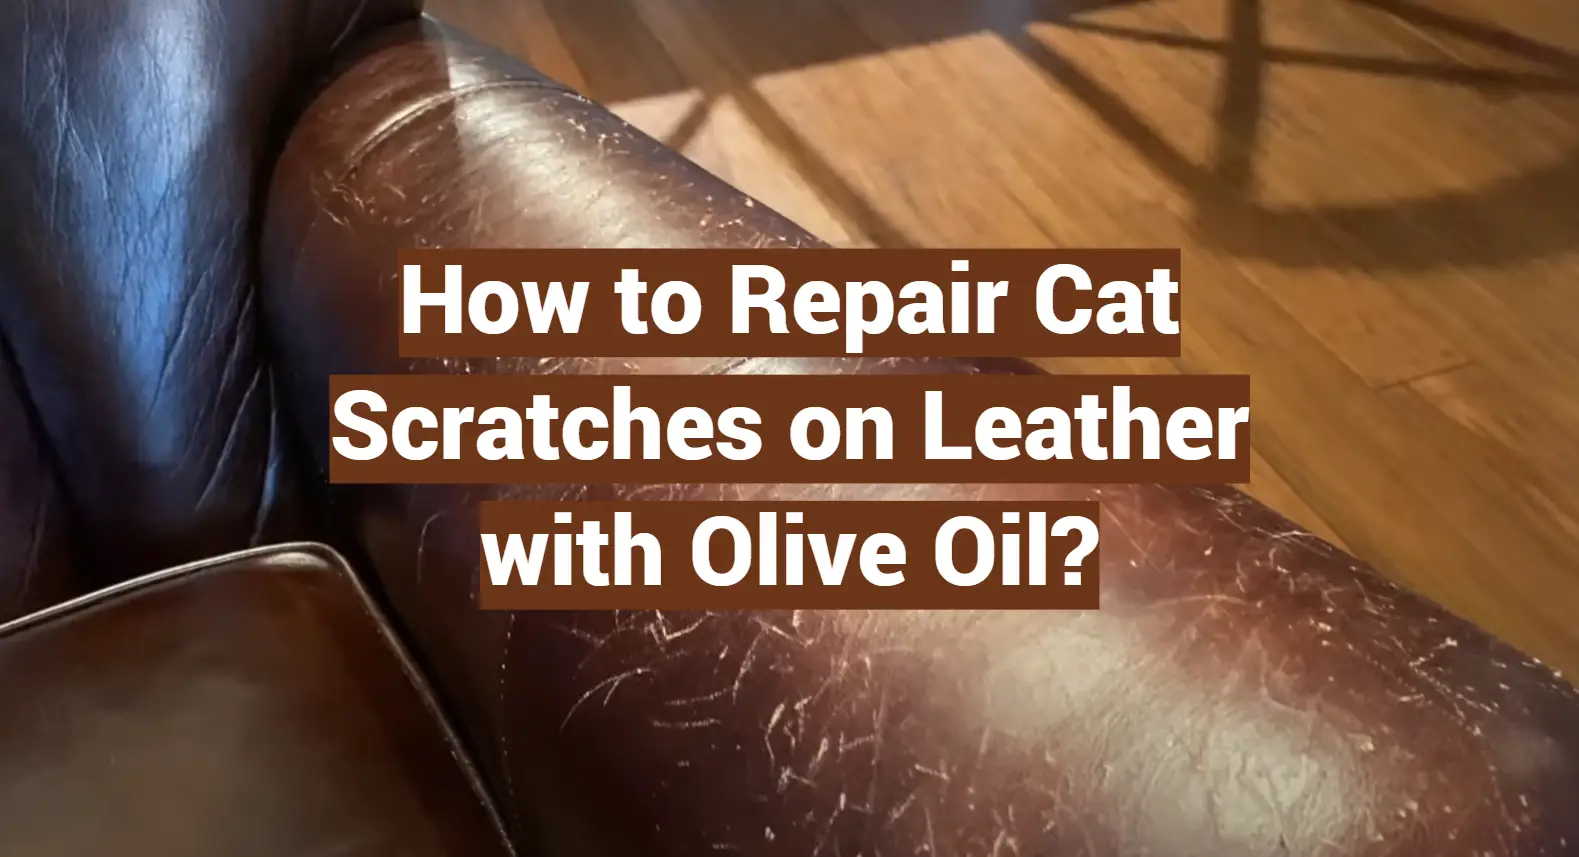 How to Repair Cat Scratches on Leather with Olive Oil?